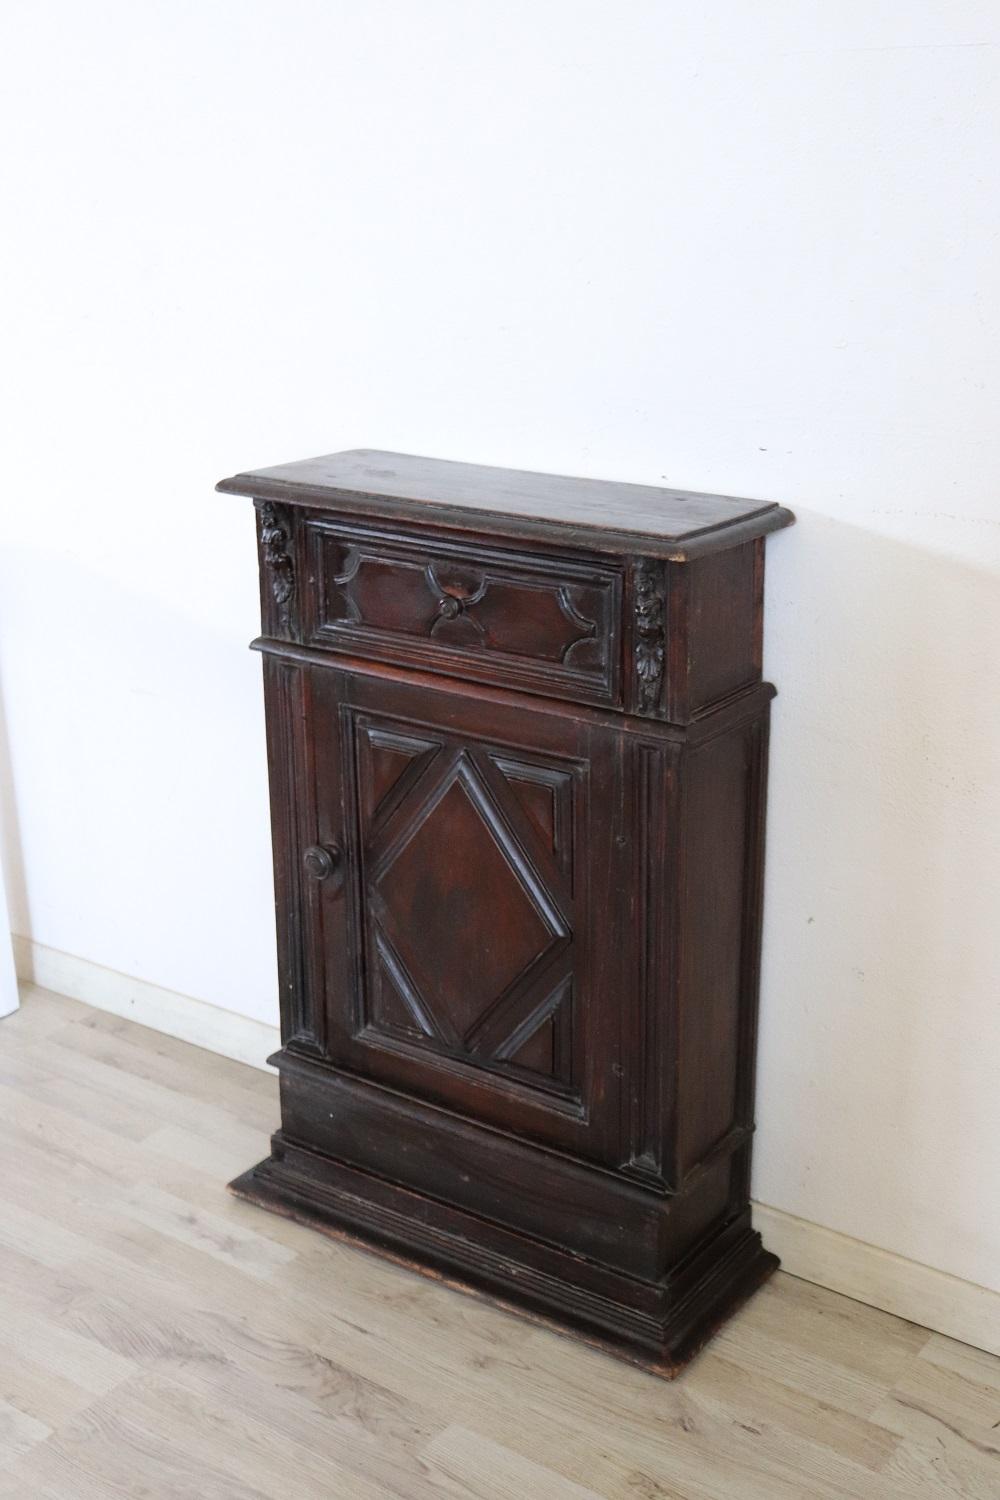 Rare and fine quality Italian renaissance style 1880s antique nightstand in carved solid walnut. On the front one comfortable drawer. Small figures carved in wood decorate the front. In antique good conditions. There are some signs of wear and age.